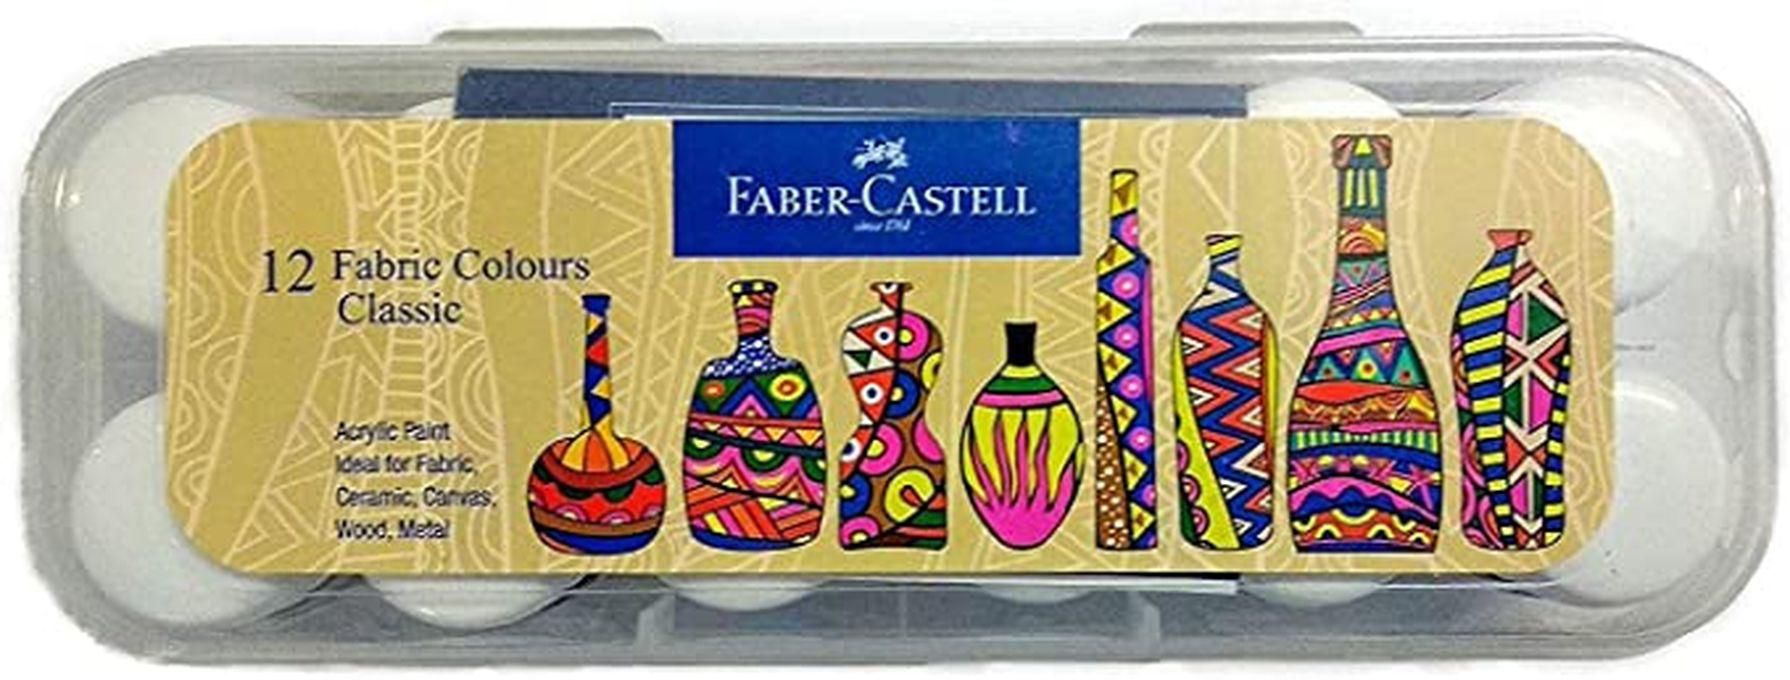 Faber Castell Fabric Acrylic Paint 12 Colors 10 Ml